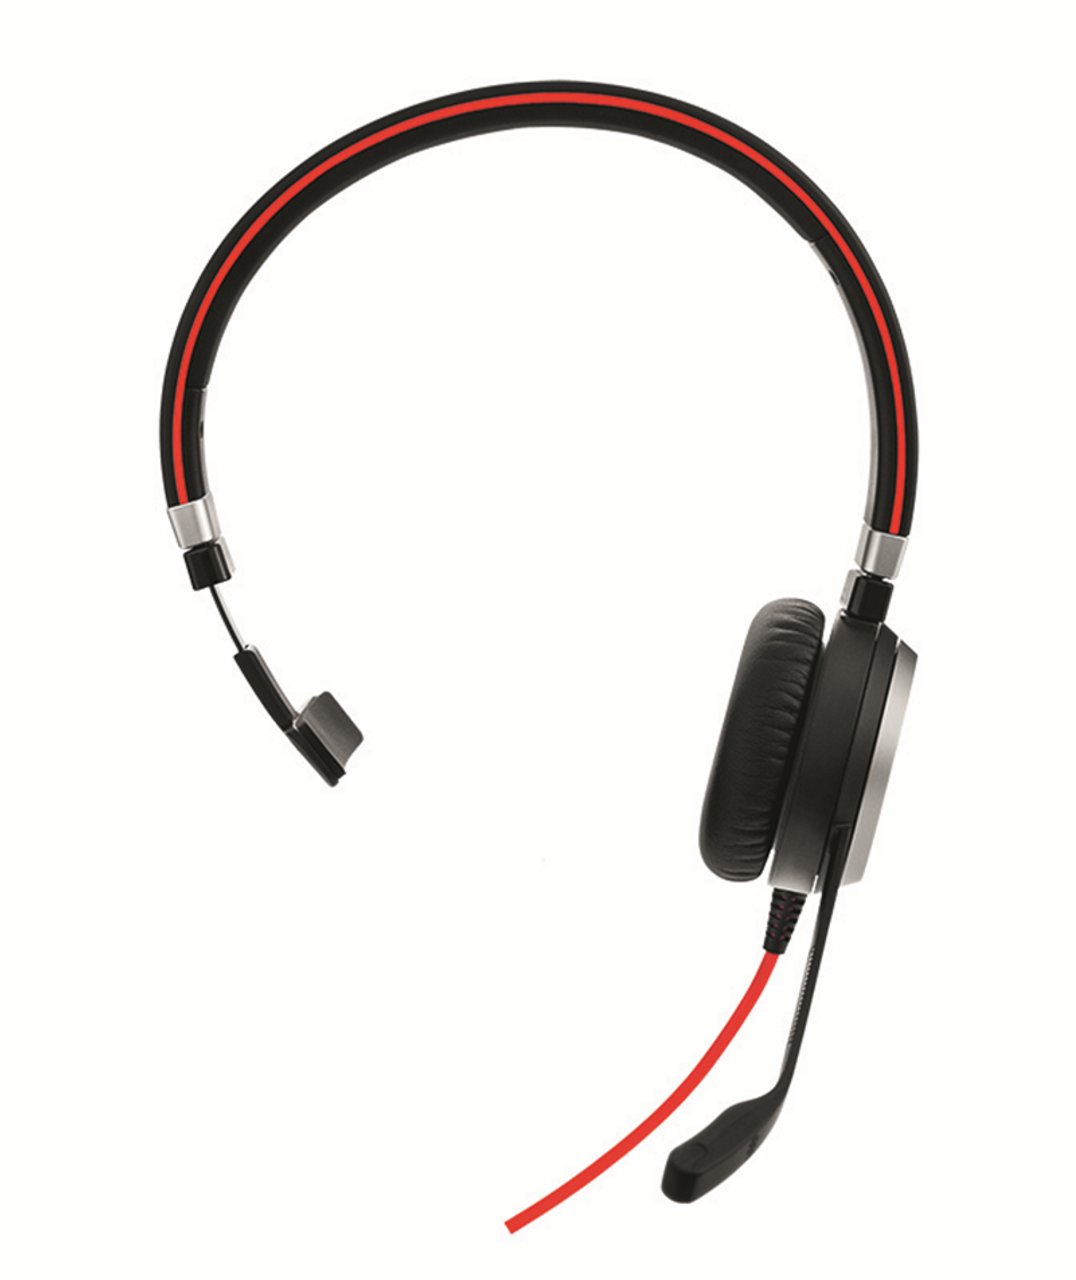 Jabra Evolve 40 UC USB-A Mono Headset, Active Noise Cancelling, Microsoft Teams certified, 2ys Warranty